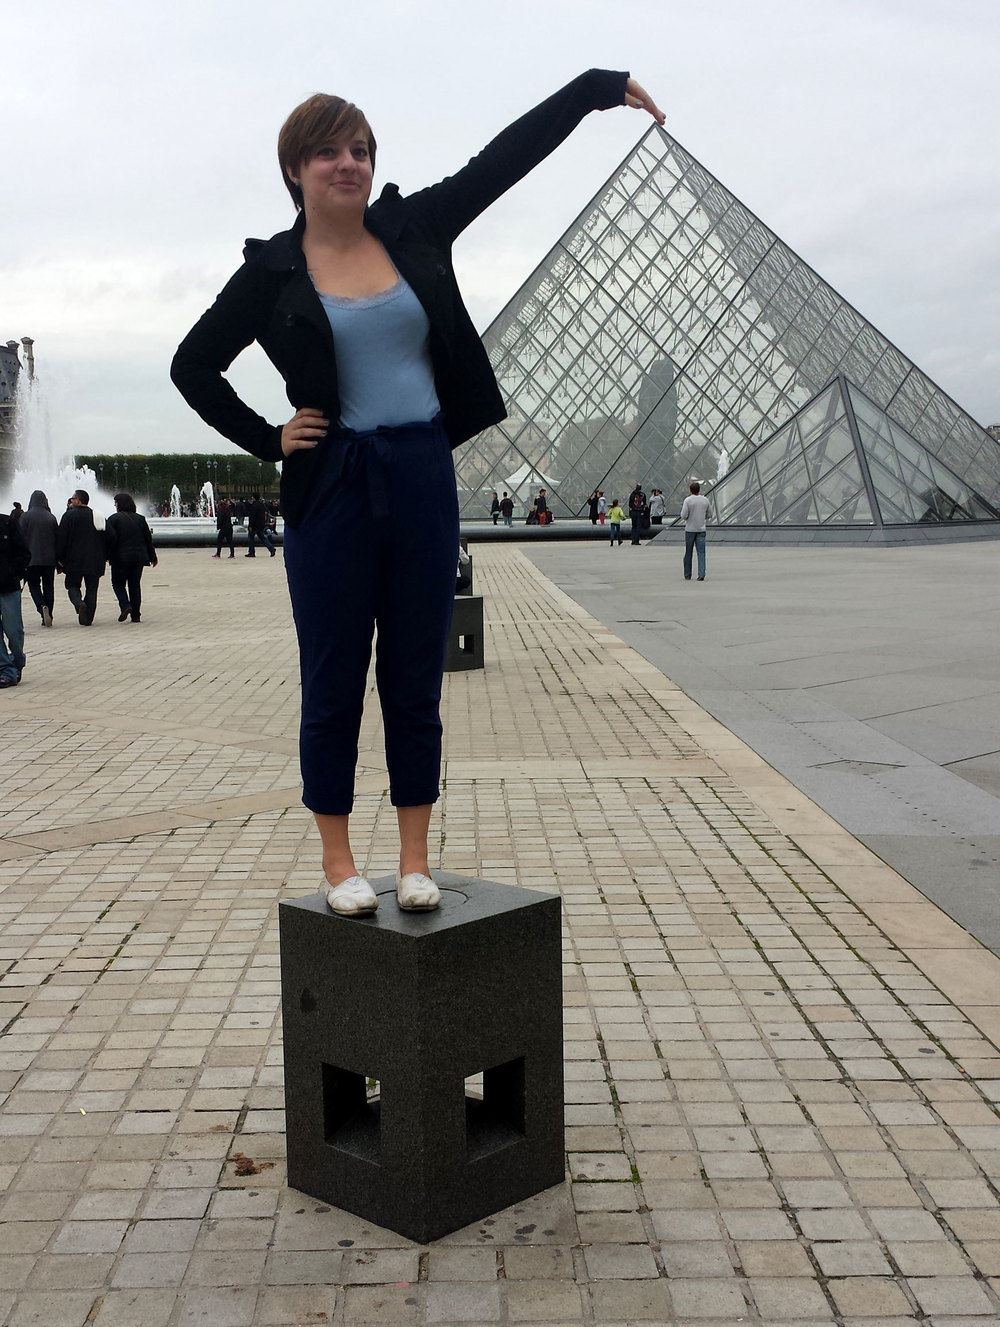  Perhaps the most touristy photo in Paris...  